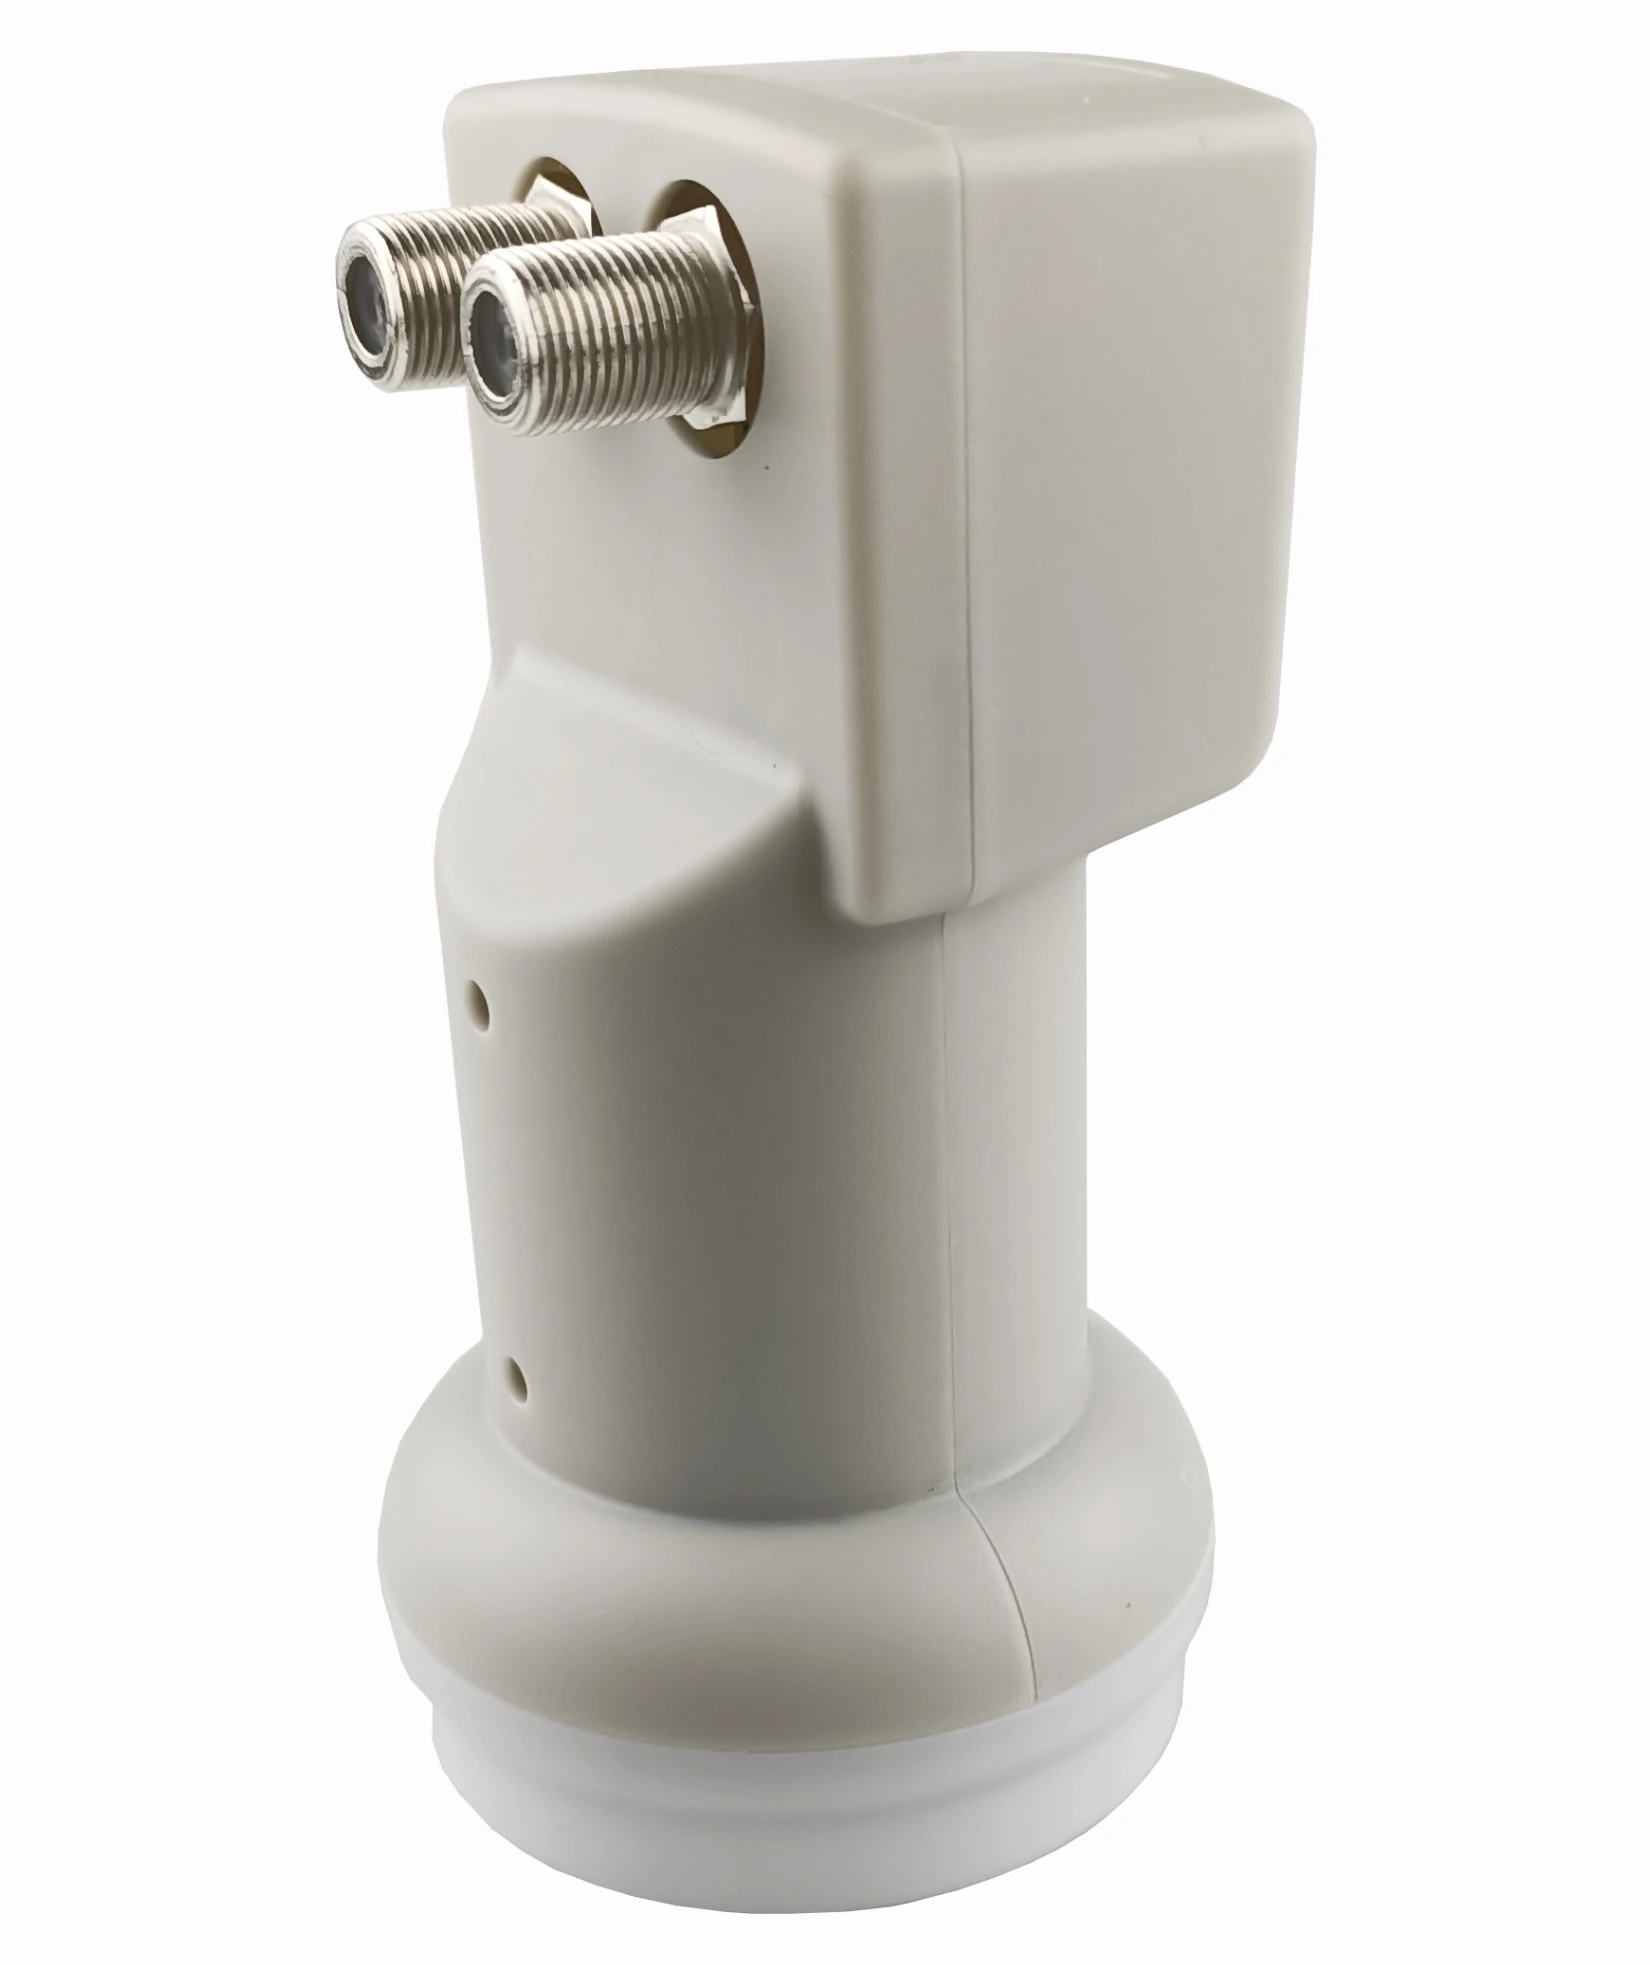 OPENSAT 2021 Hot Selling In India Best Price And Good Quality Ku Band Lnb